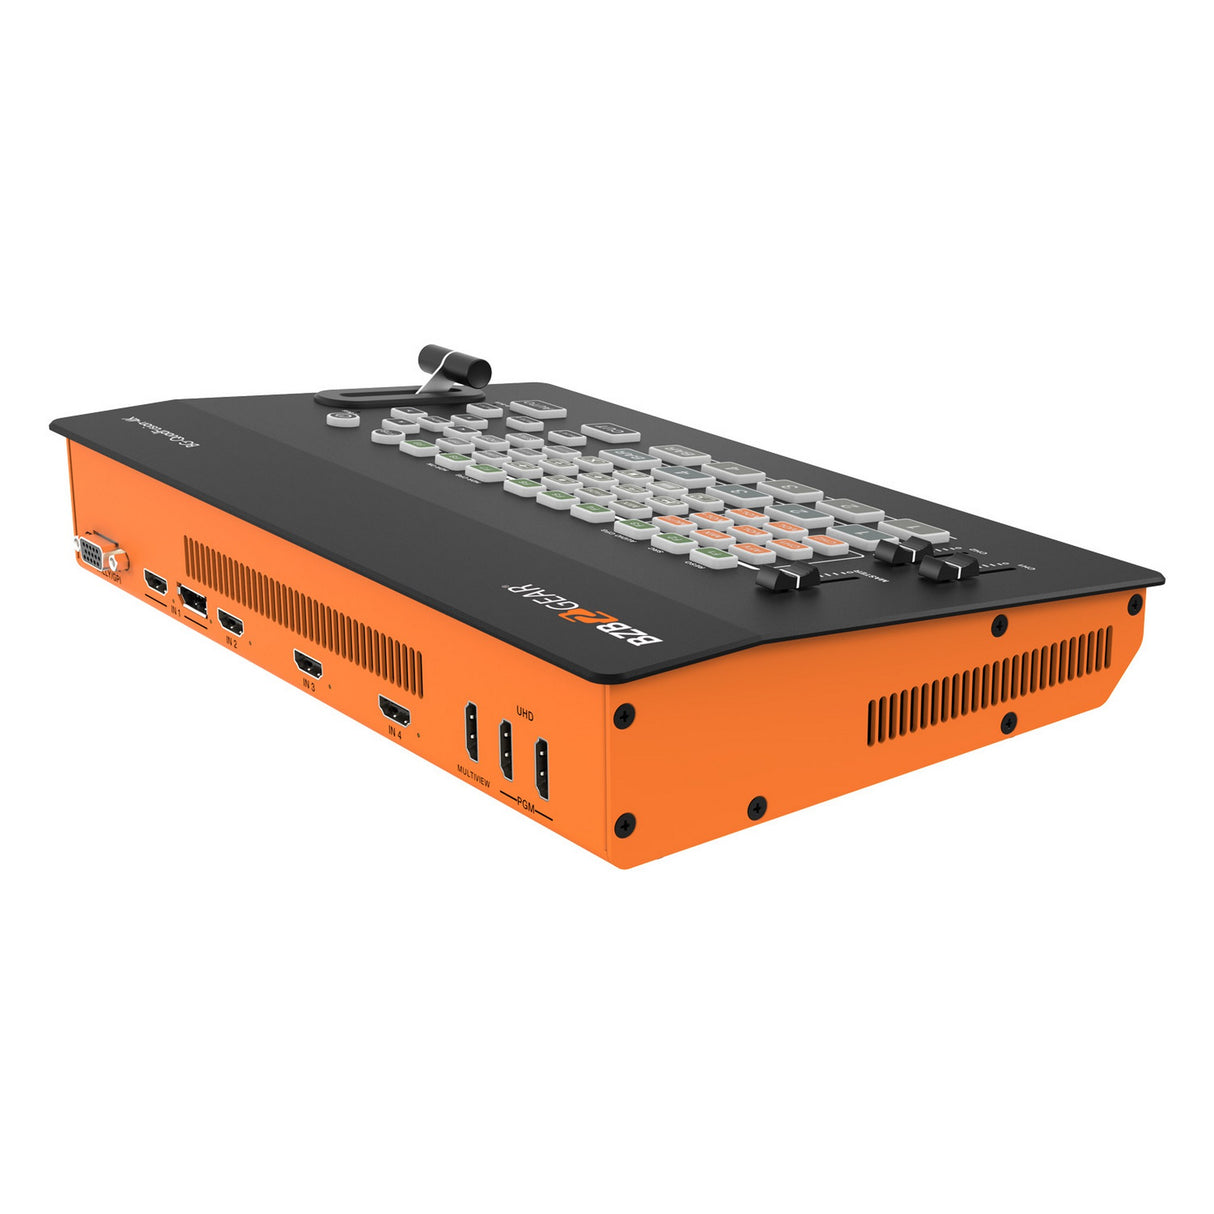 BZBGEAR BG-QuadFusion-4K 4-Channel 4K UHD Live Streaming HDMI/DP Switcher Mixer with PIP and USB 3.0 Capture Card